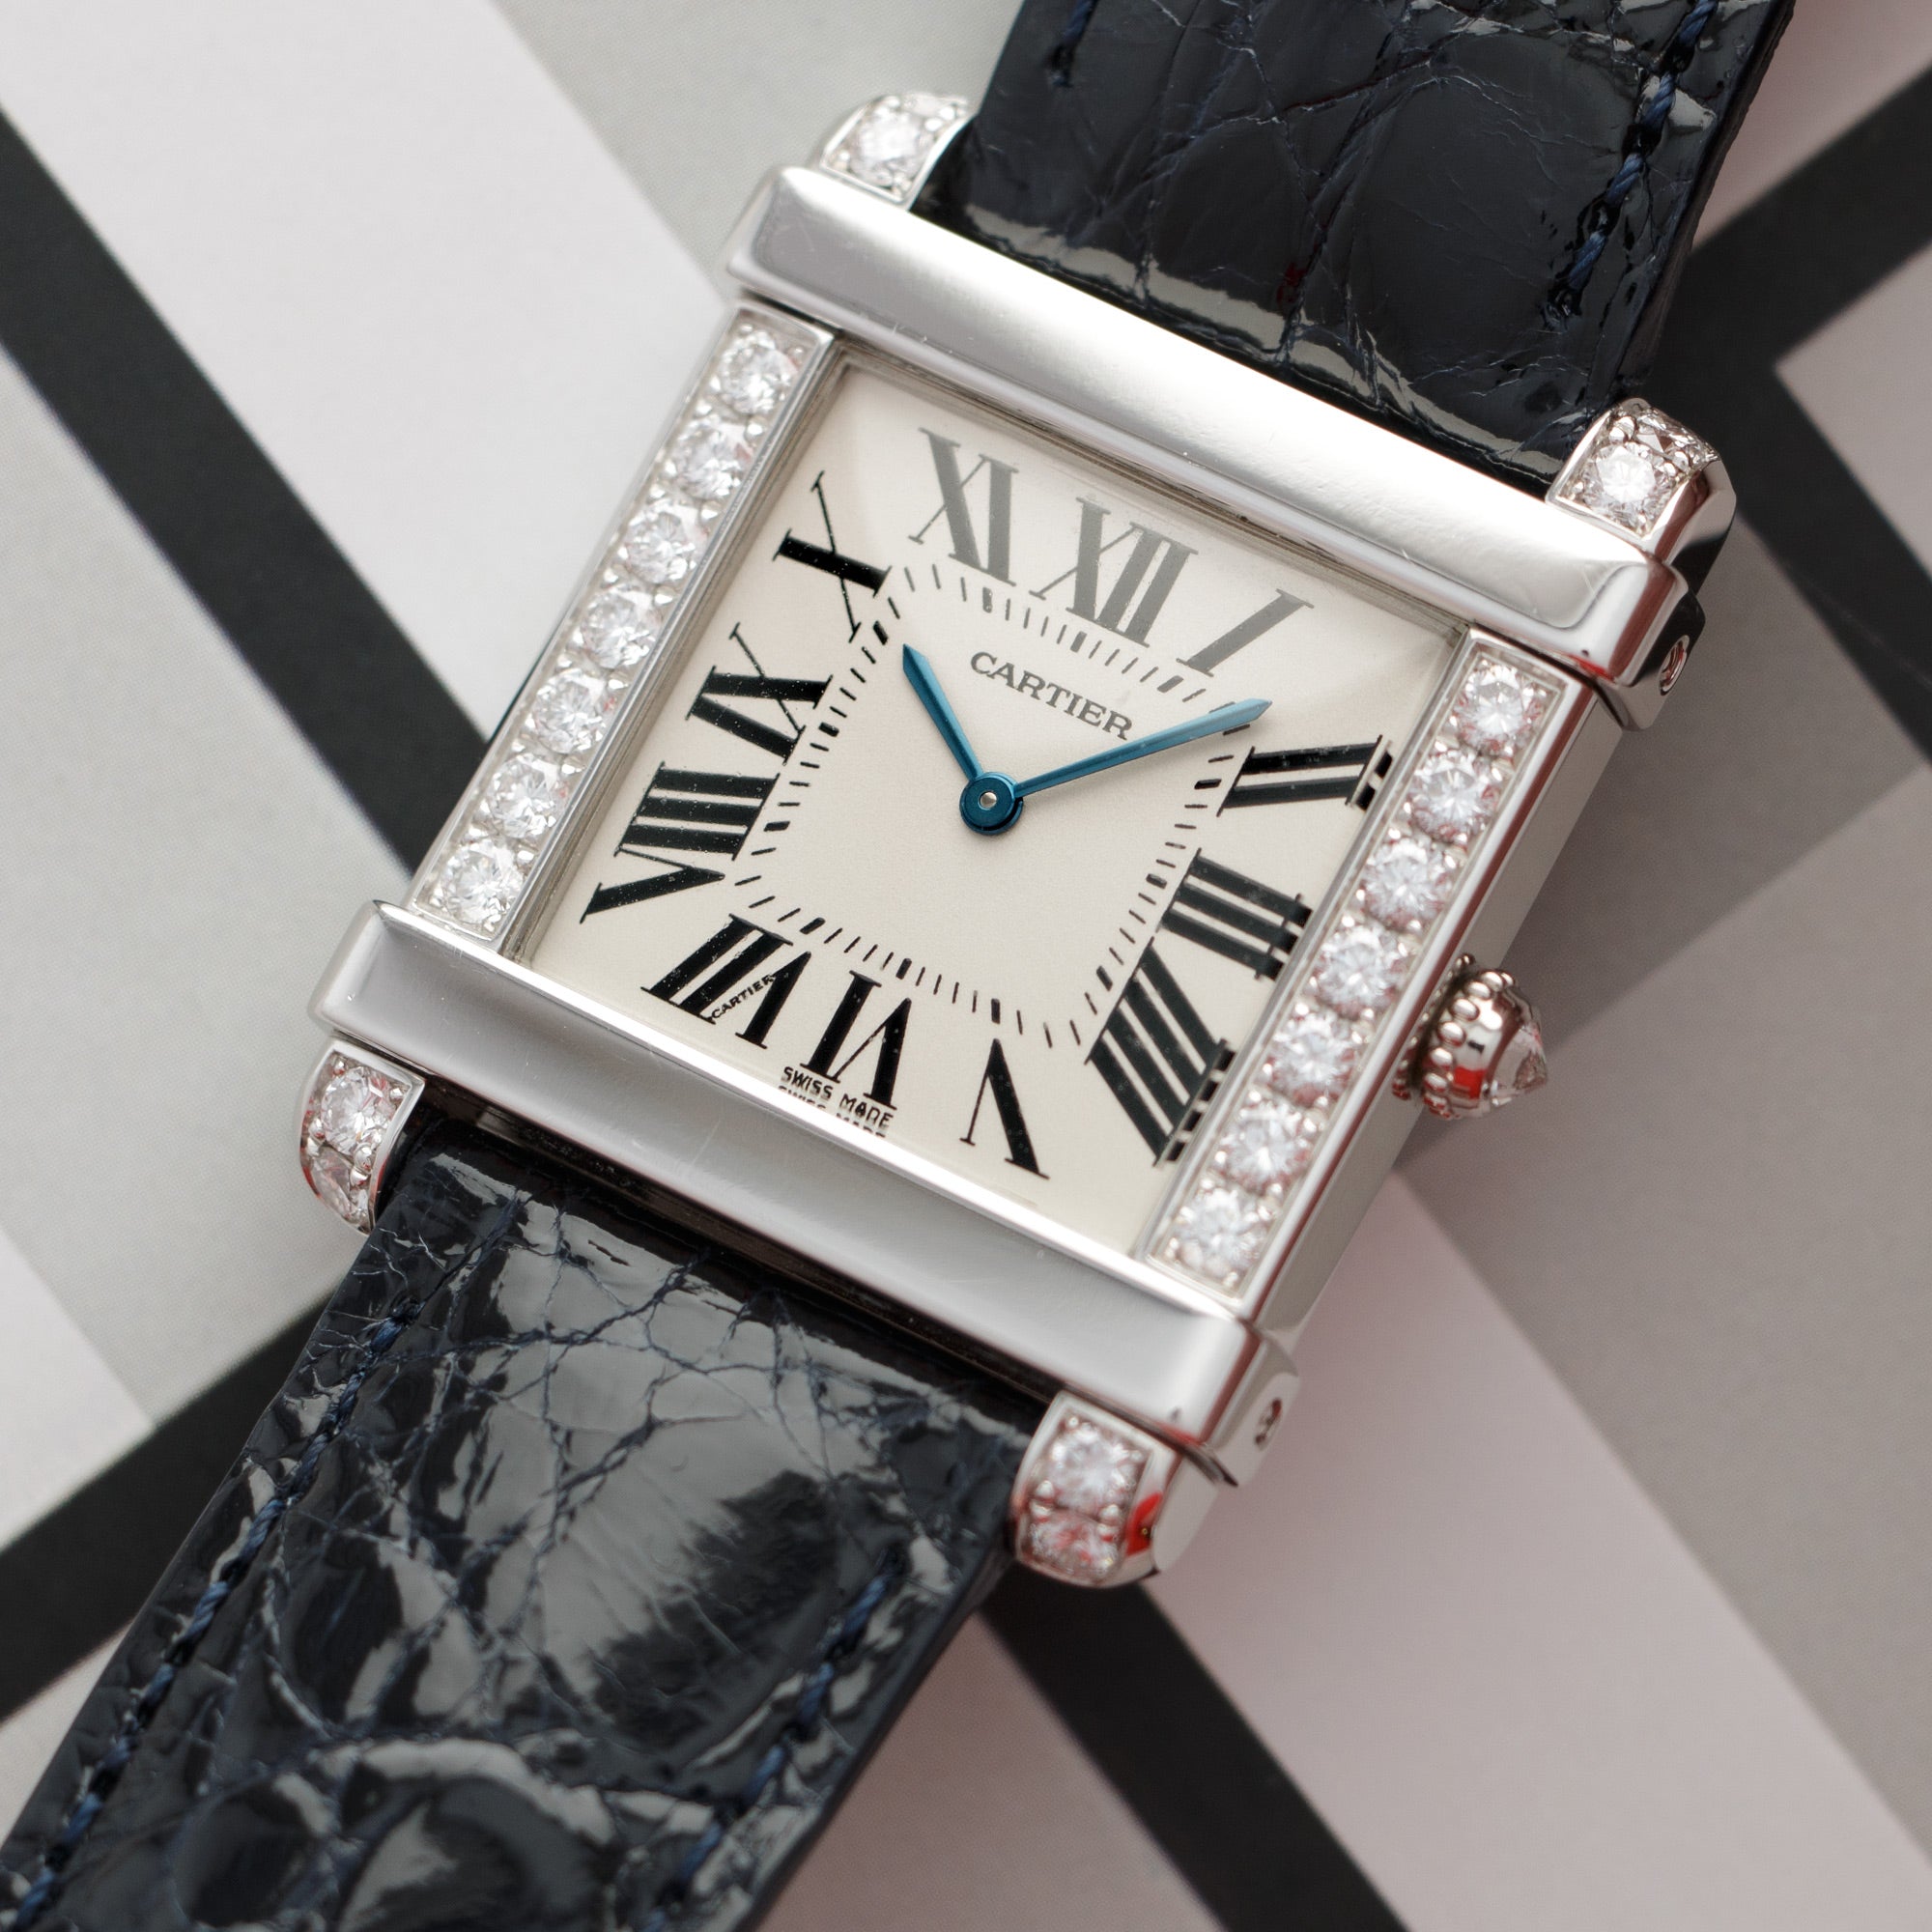 Cartier - Cartier Platinum and Diamond Tank Chinoise Ref. 2685 - The Keystone Watches